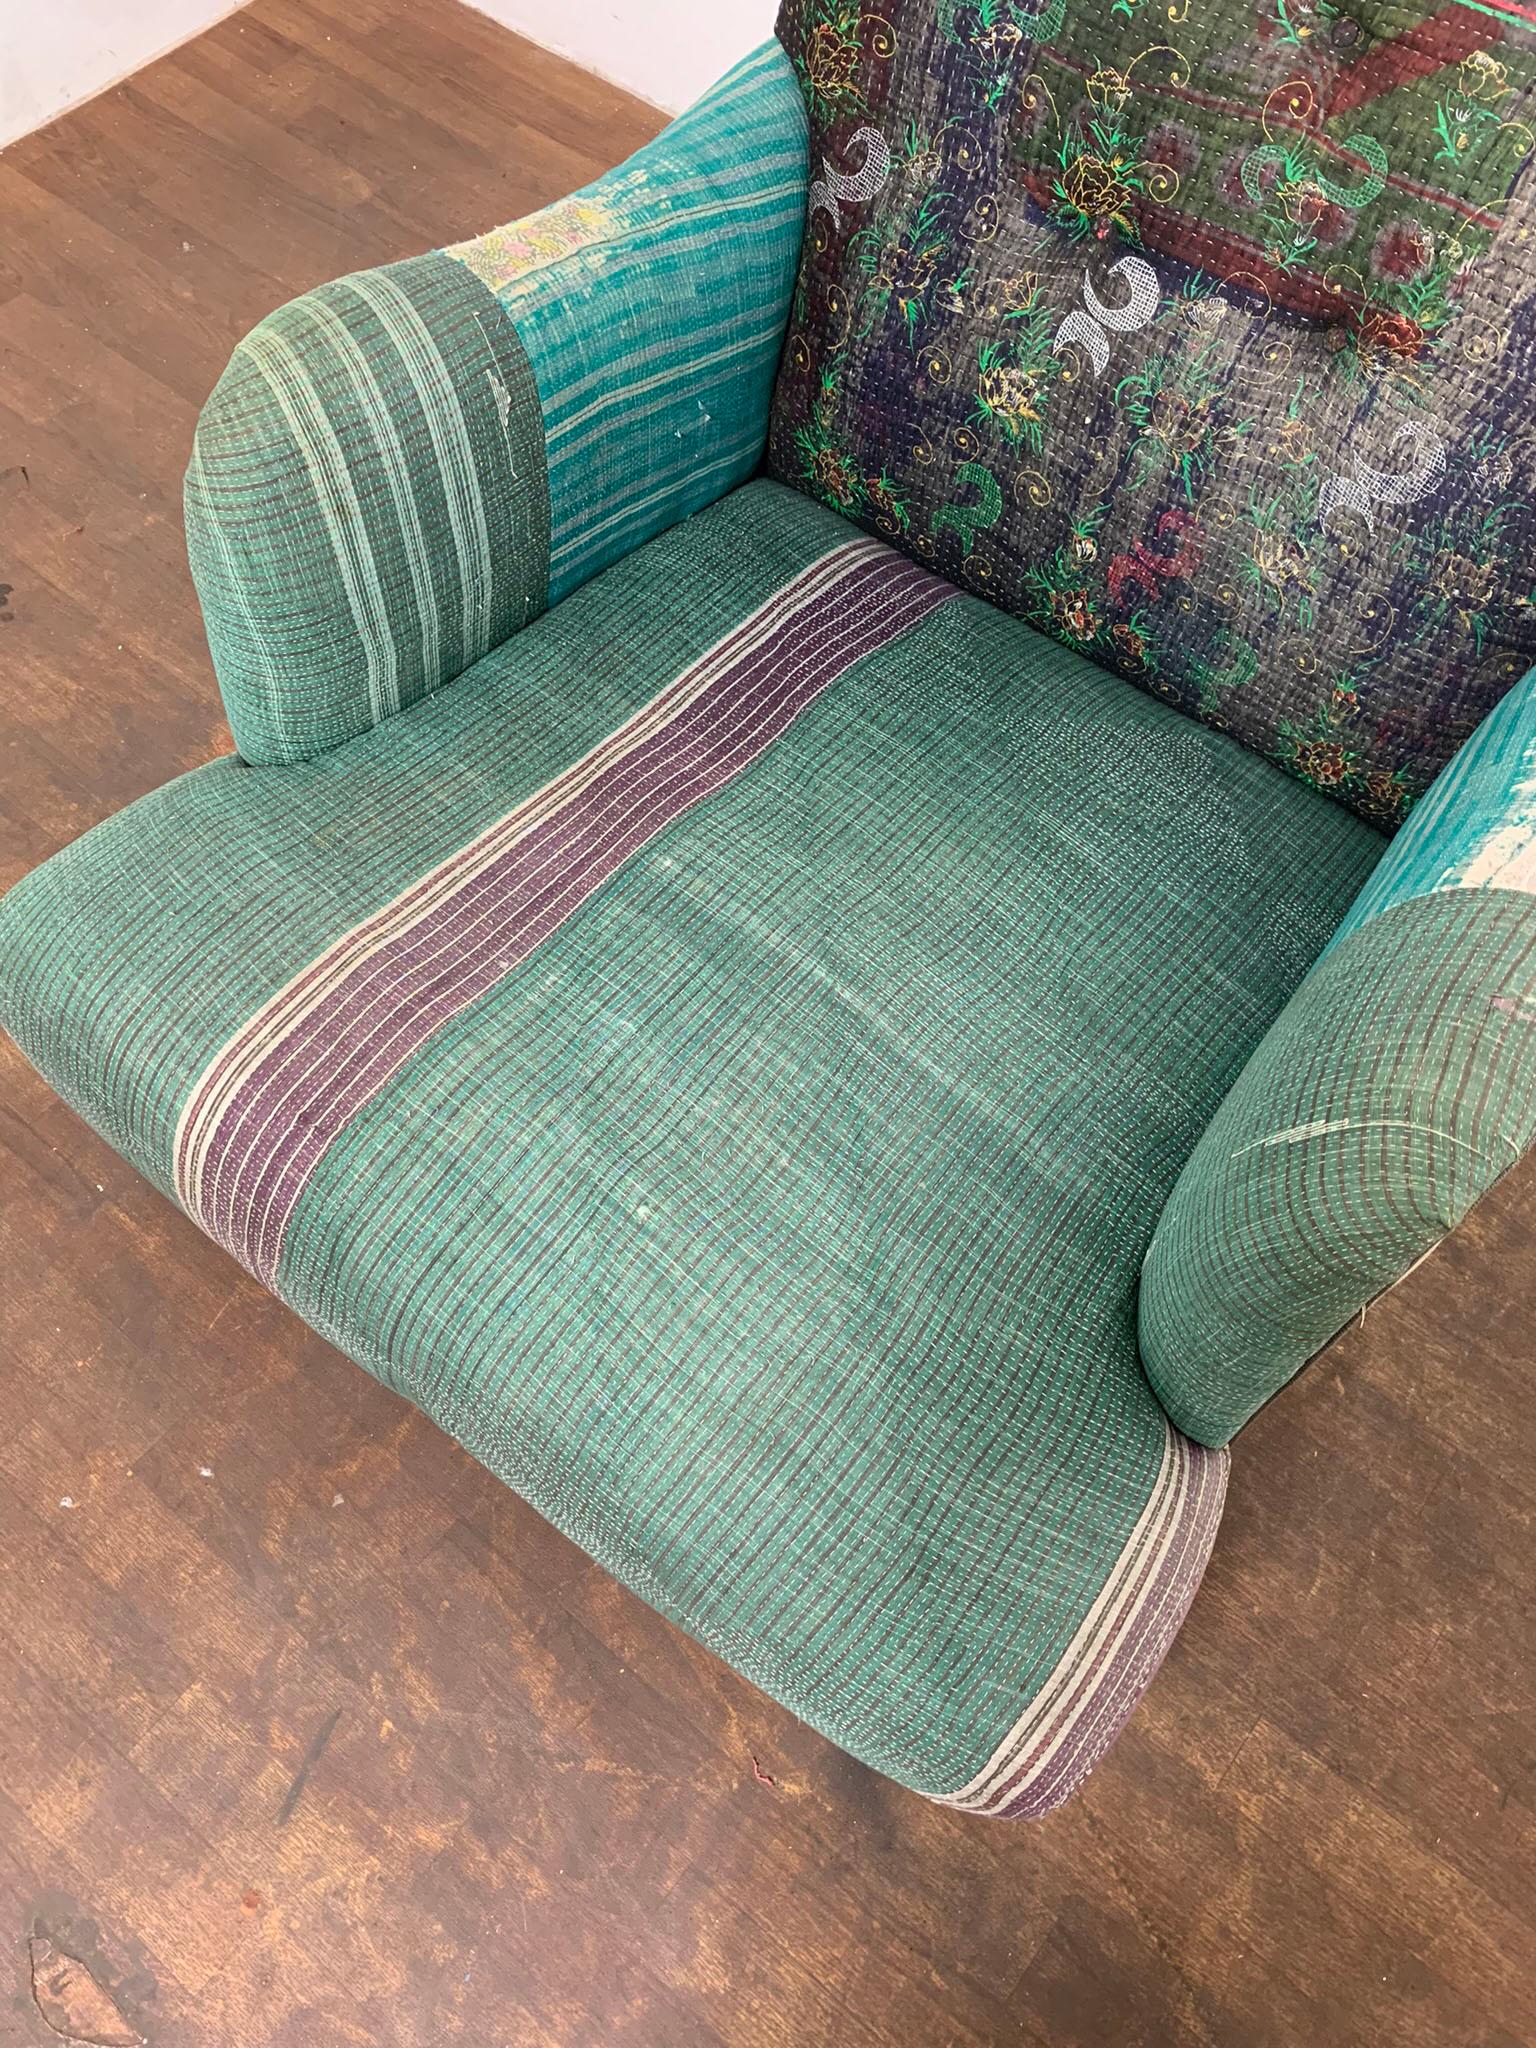 Cisco Brother's Acacia Lounge Chair in Vintage Quilt Upholstery 4